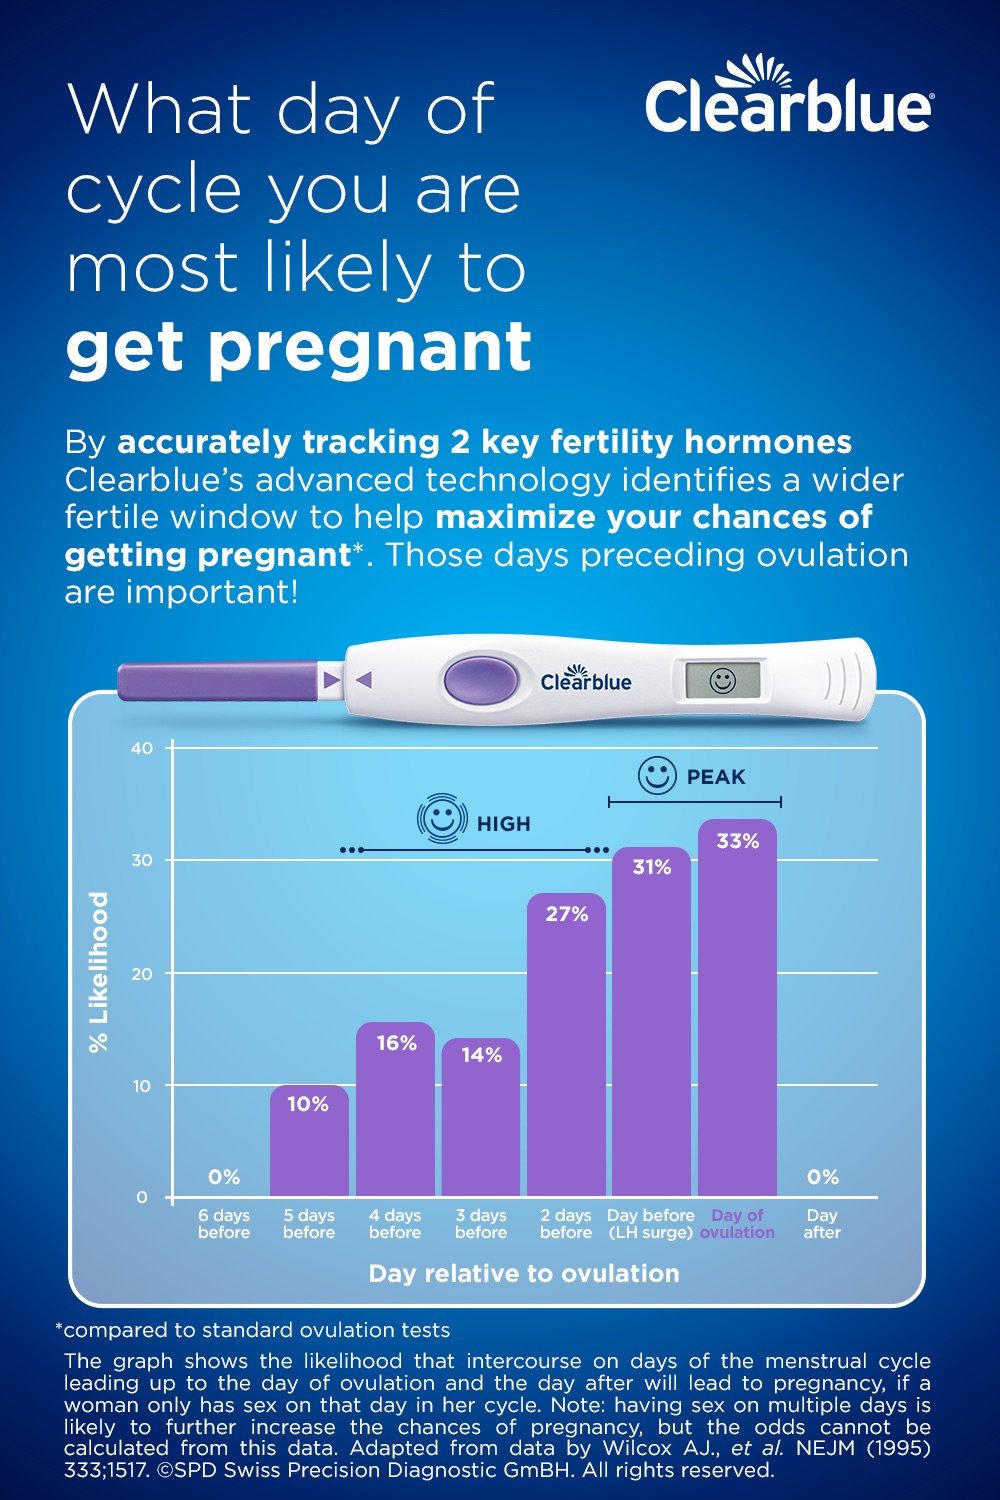 Days most likely to get pregnant